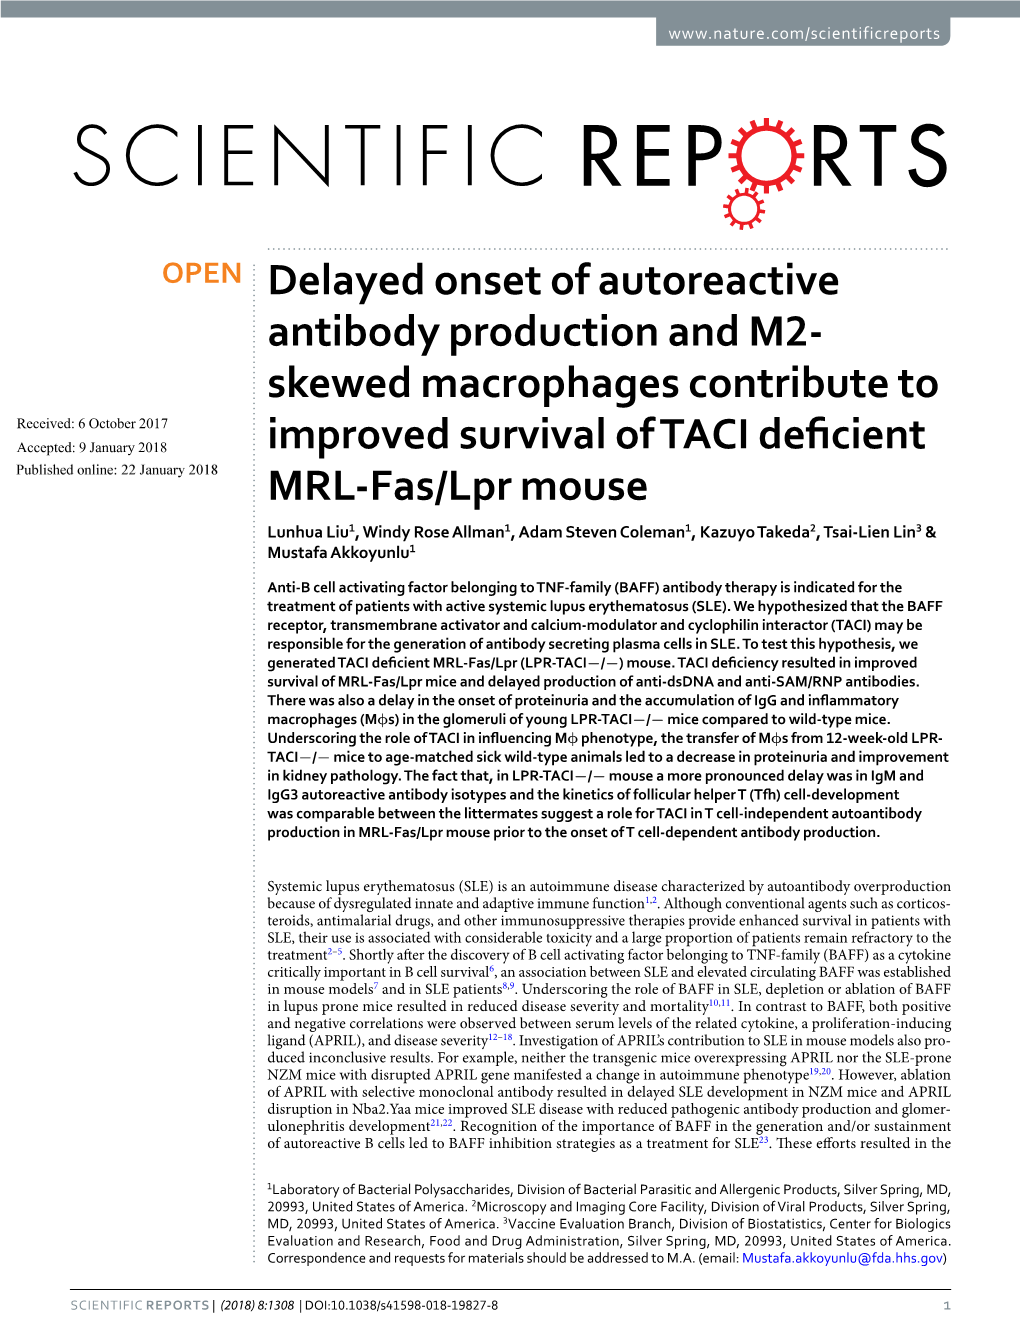 Delayed Onset of Autoreactive Antibody Production and M2